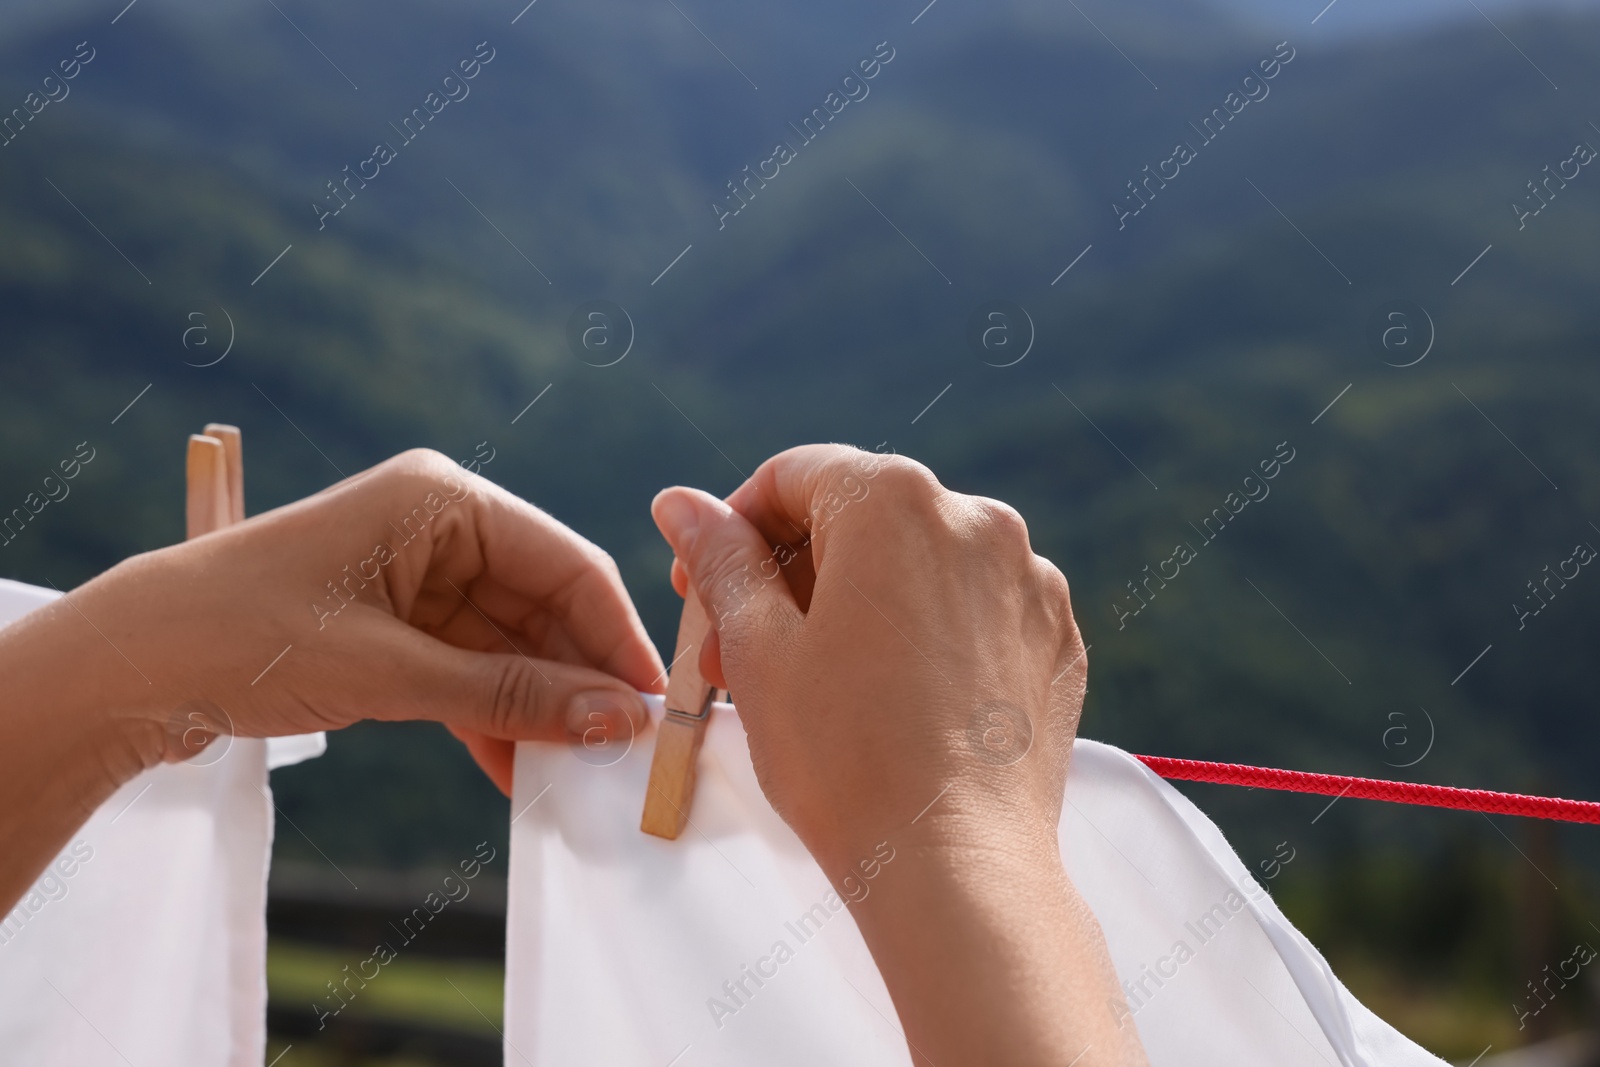 Photo of Woman hanging clean laundry with clothespins on washing line in mountains, closeup